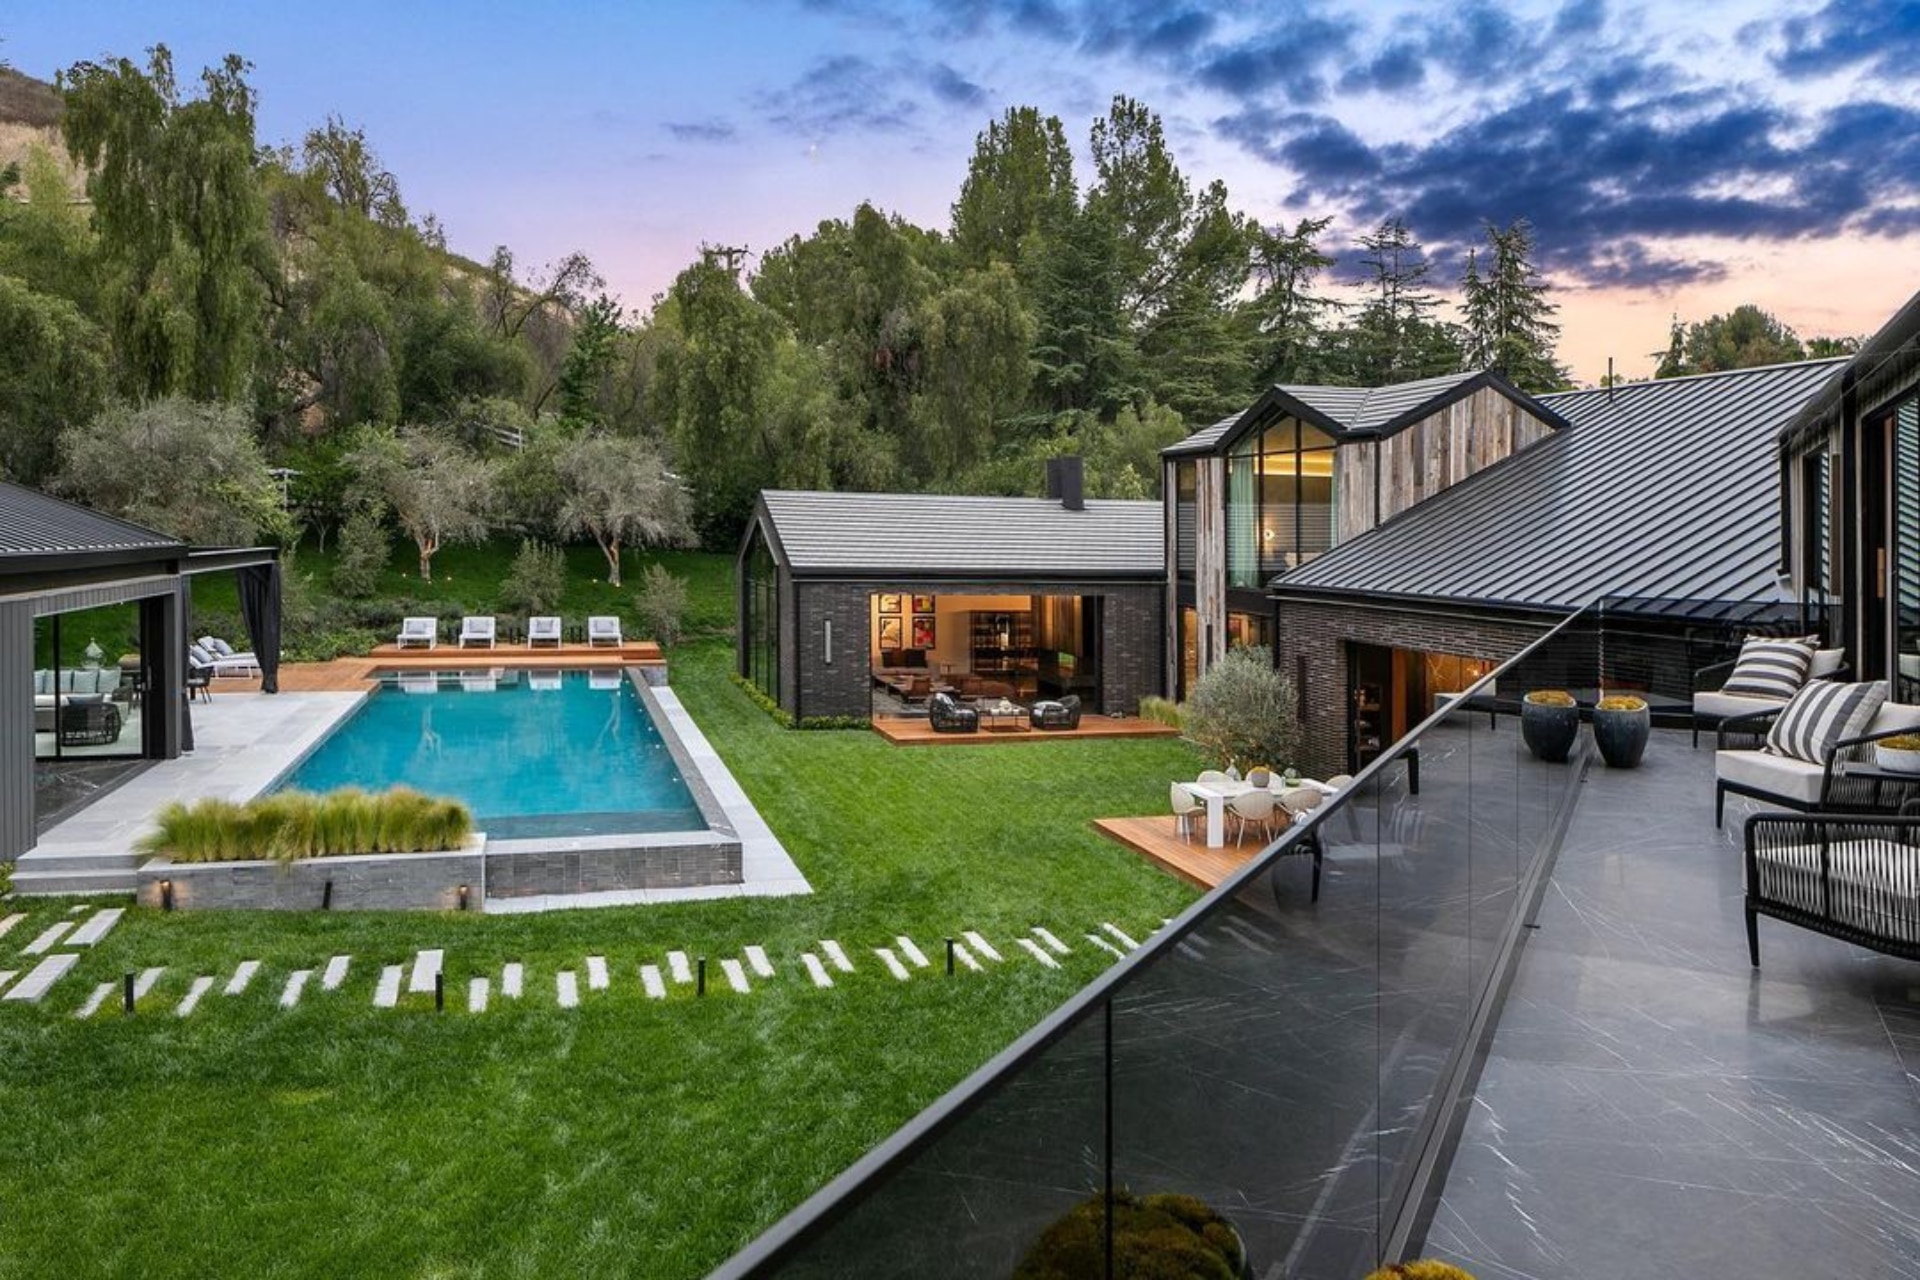 Ben Simmons just bought a brand new L.A. mansion - GQ Australia